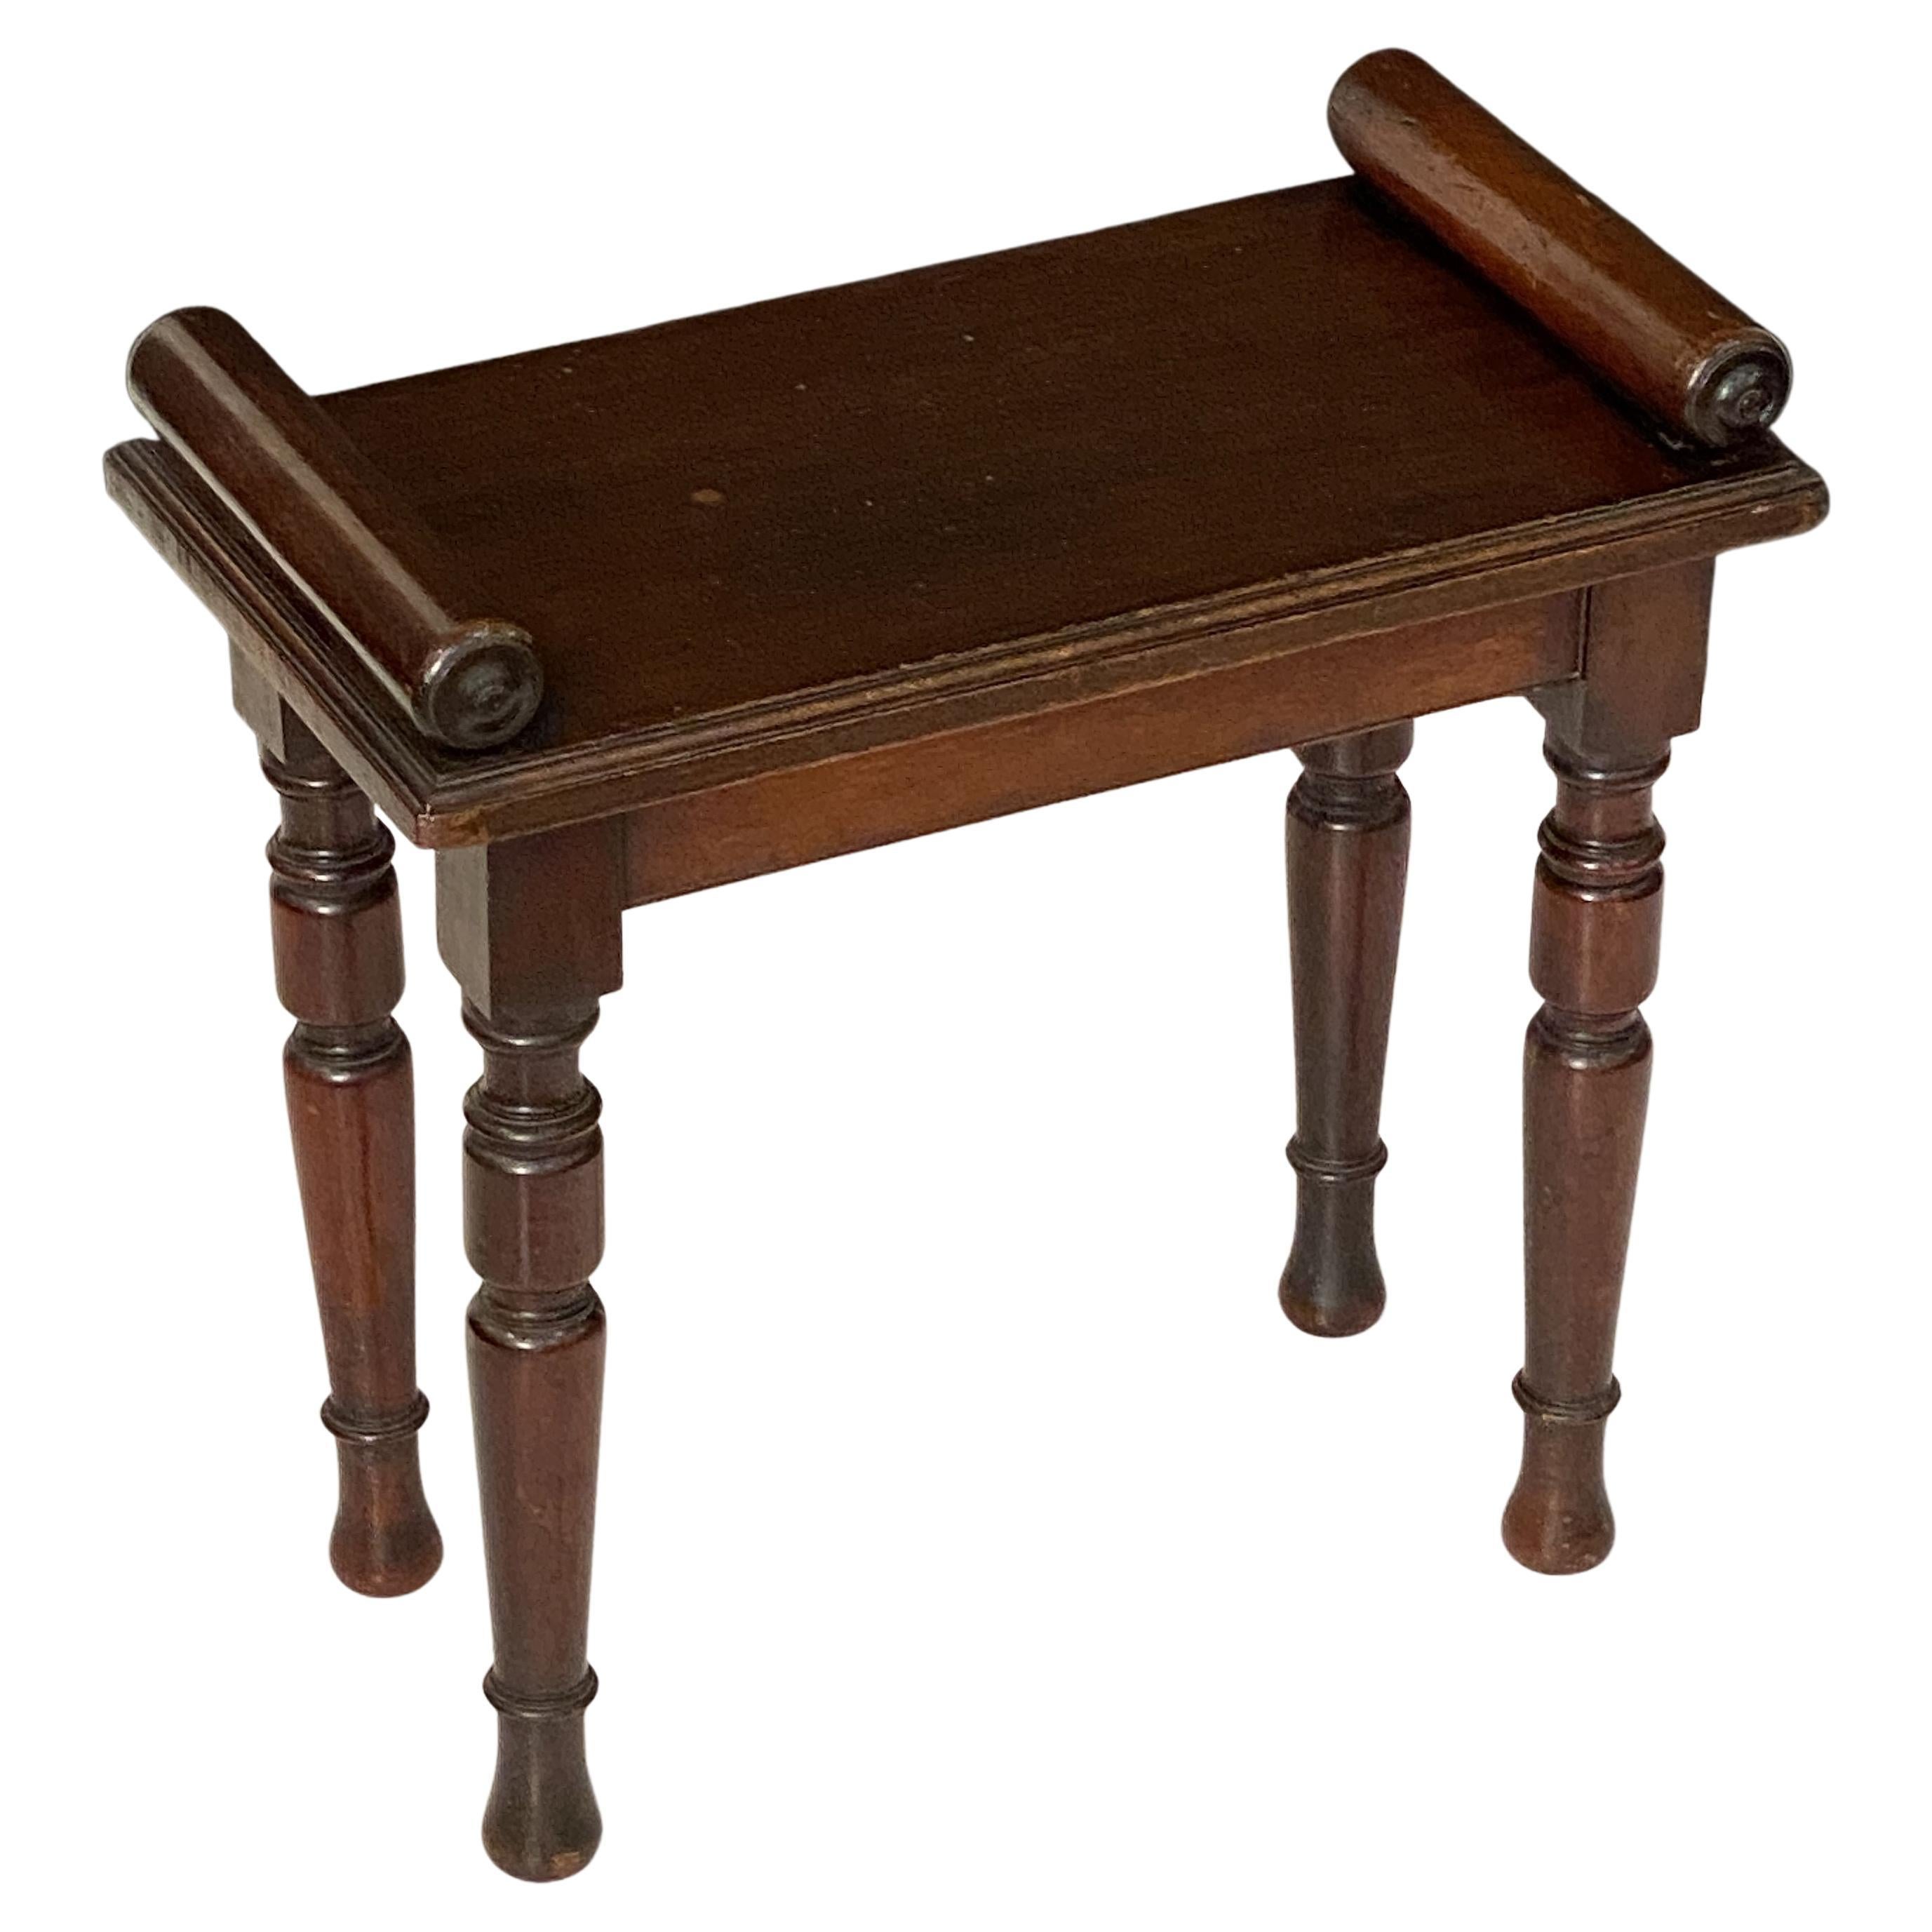 Small English Hall Bench or Window Seat of Mahogany on Turned Legs